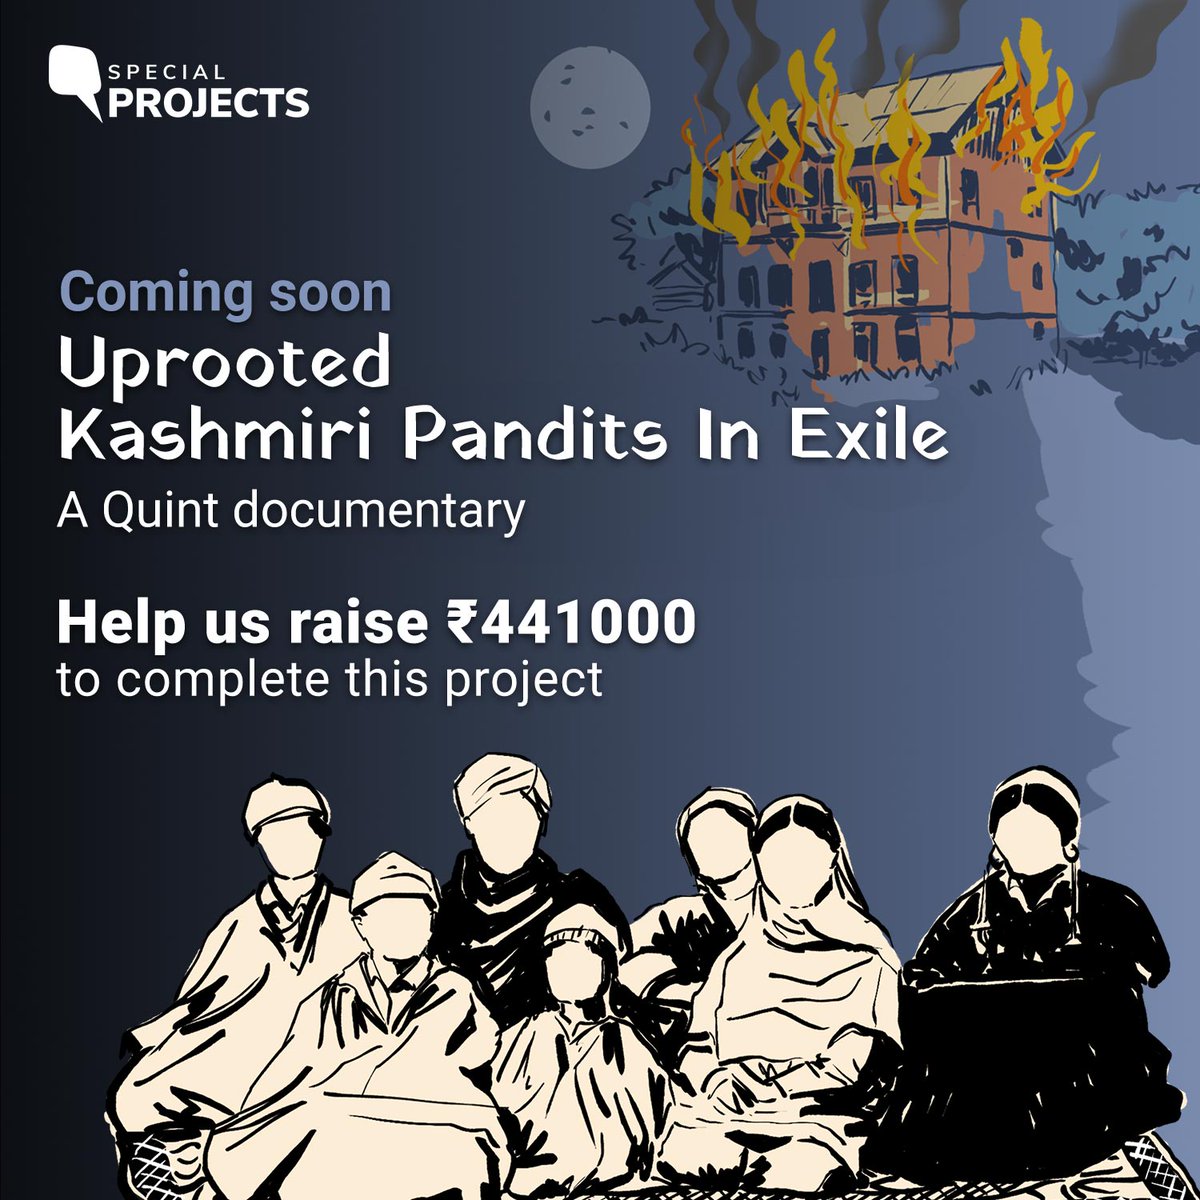 30 years after they were uprooted, the memories of their homeland still haunt them. 'Uprooted: Kashmiri Pandits in Exile' will attempt to bring to you the true state of #KashmiriPandits. Help us raise ₹4,41,000 for this special project: bit.ly/3qEenNF